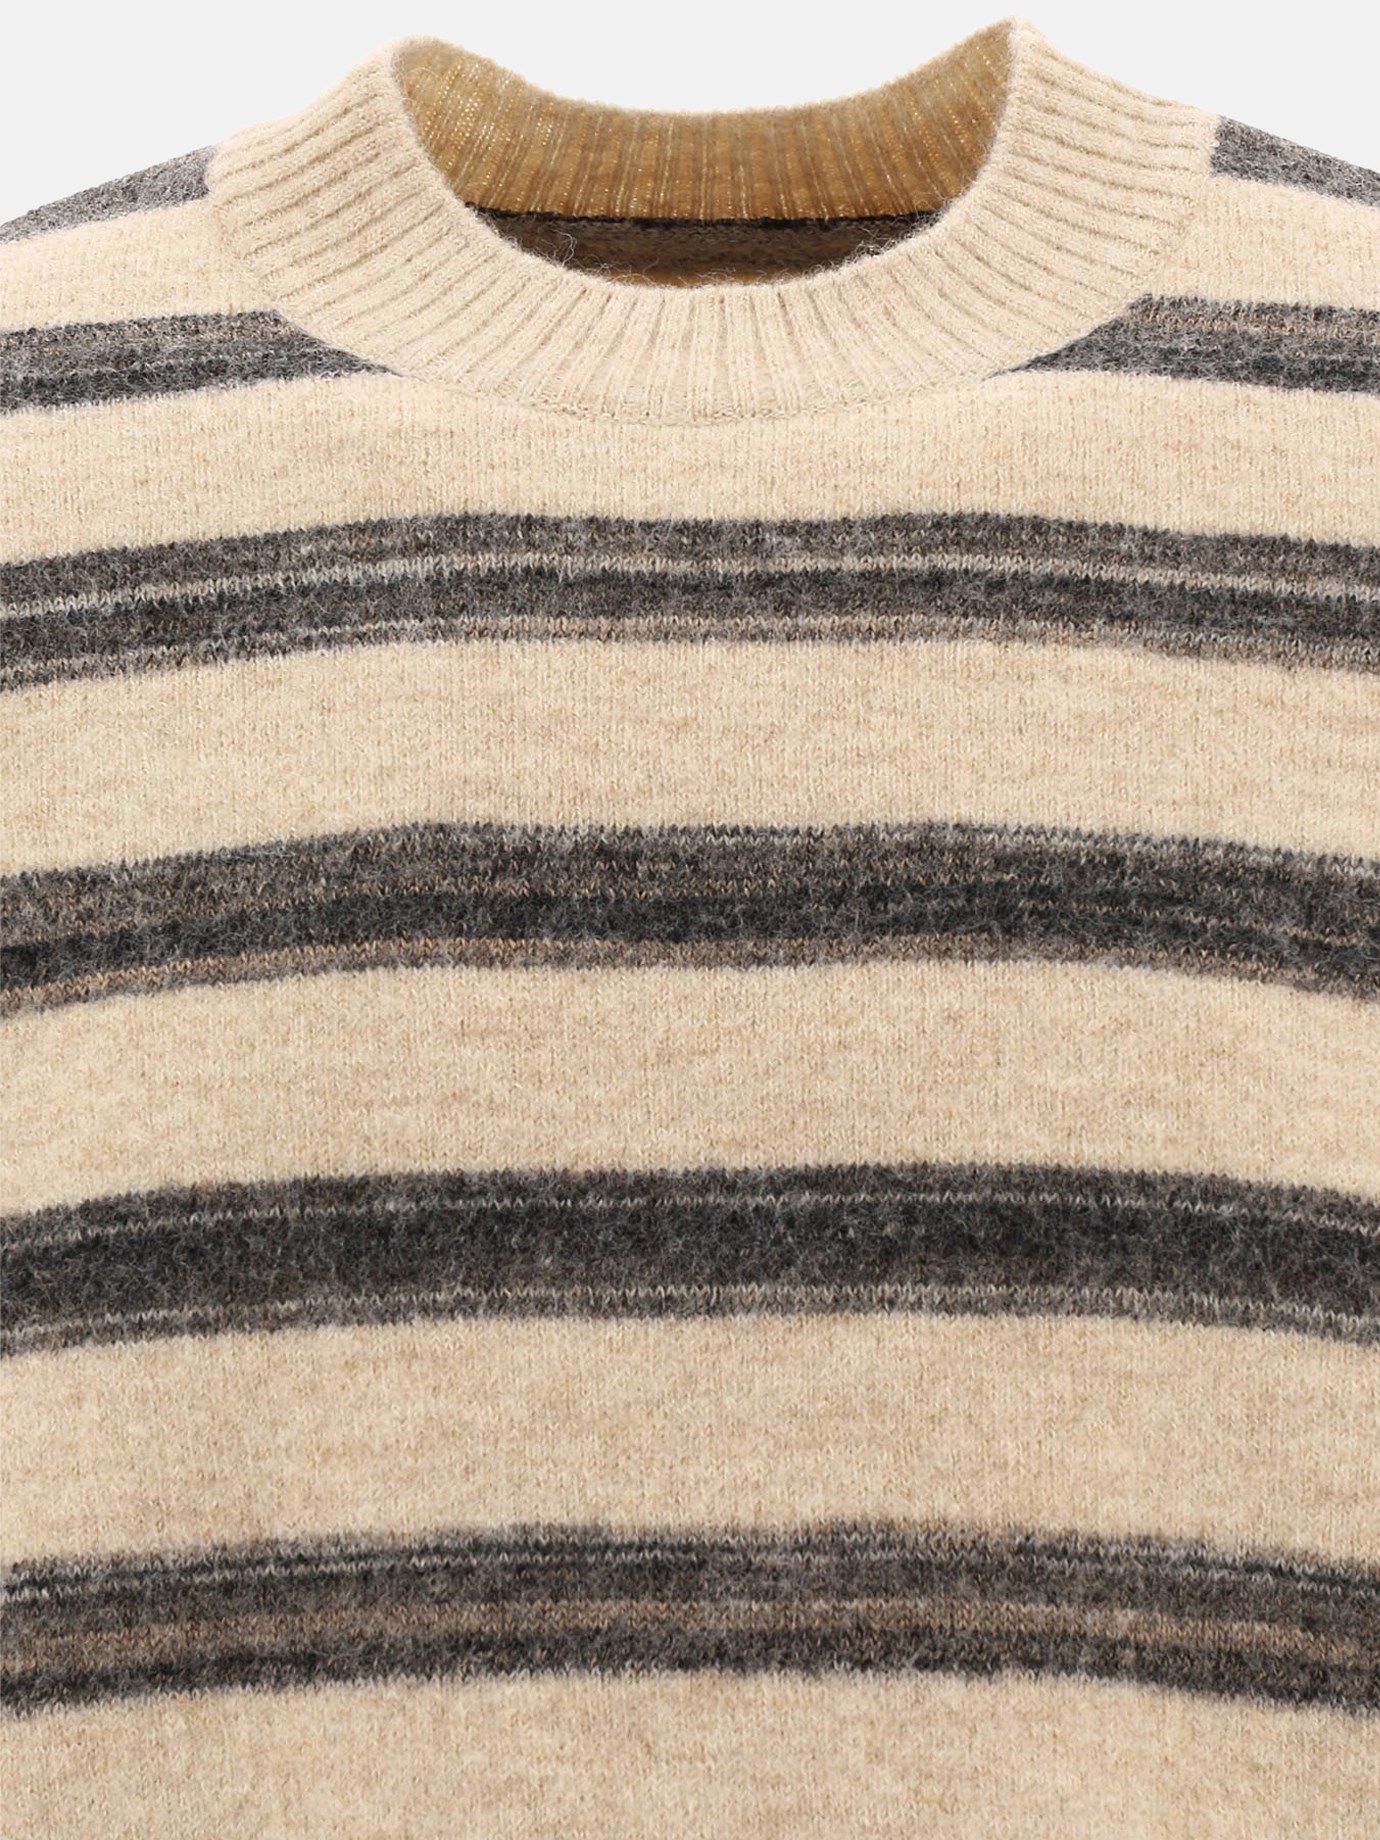 Maglione a righe  Four Stitches  by Maison Margiela